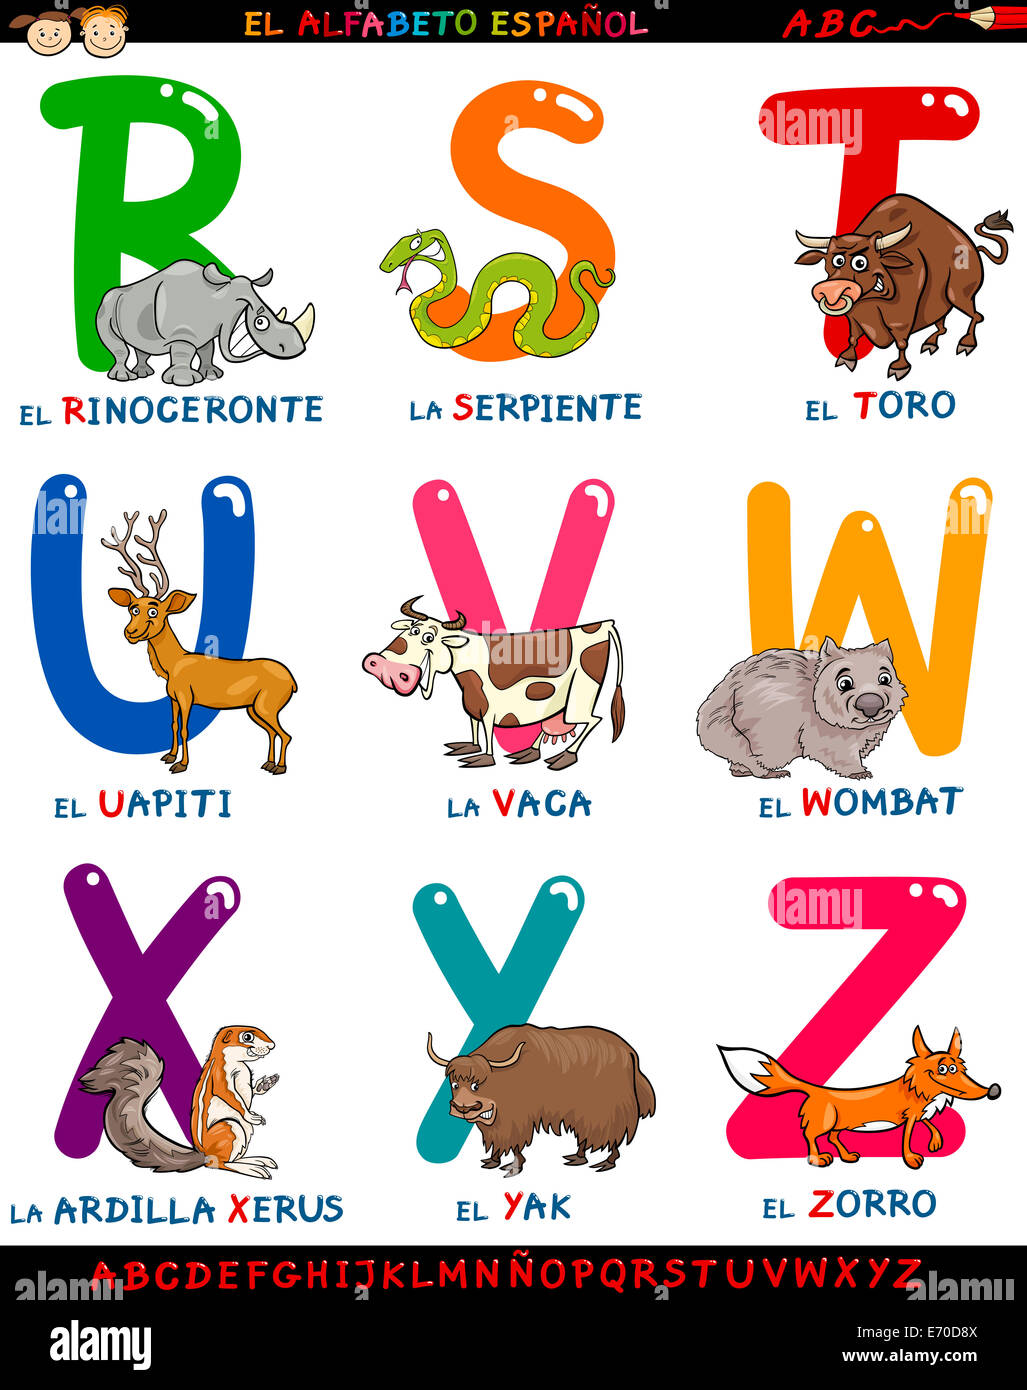 Cartoon Illustration of Colorful Spanish Alphabet or Alfabeto Espanol Set  with Funny Animals from Letter R to Z Stock Photo - Alamy